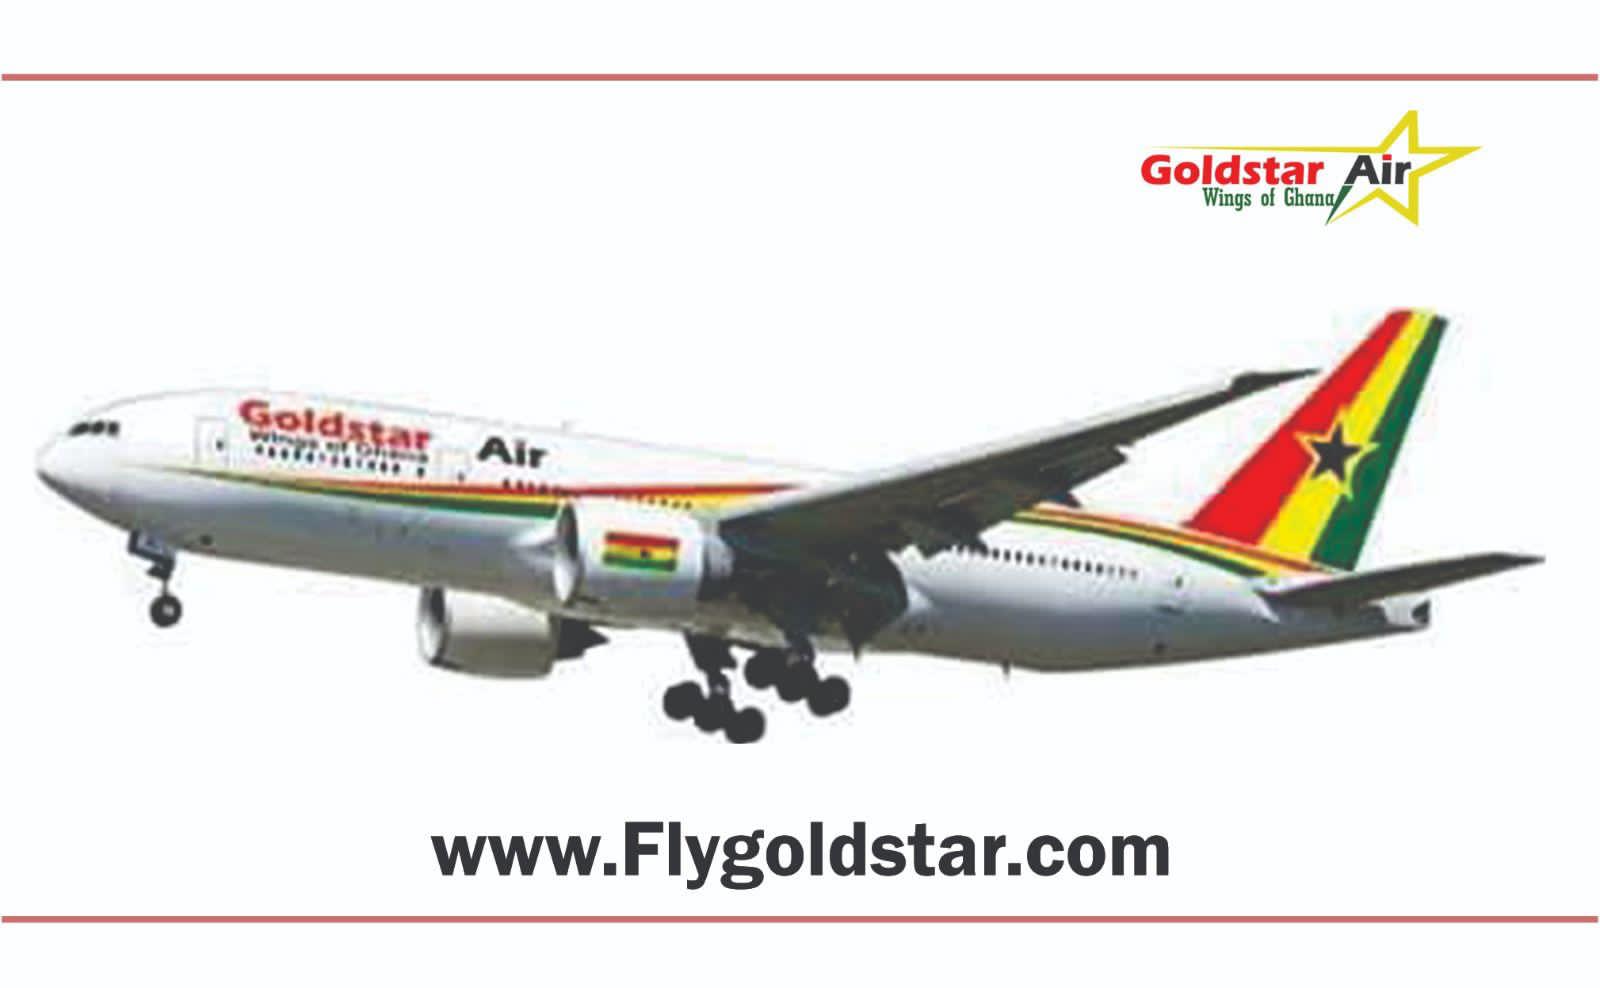 Goldstar Air to give Kumasi International Airport global recognition